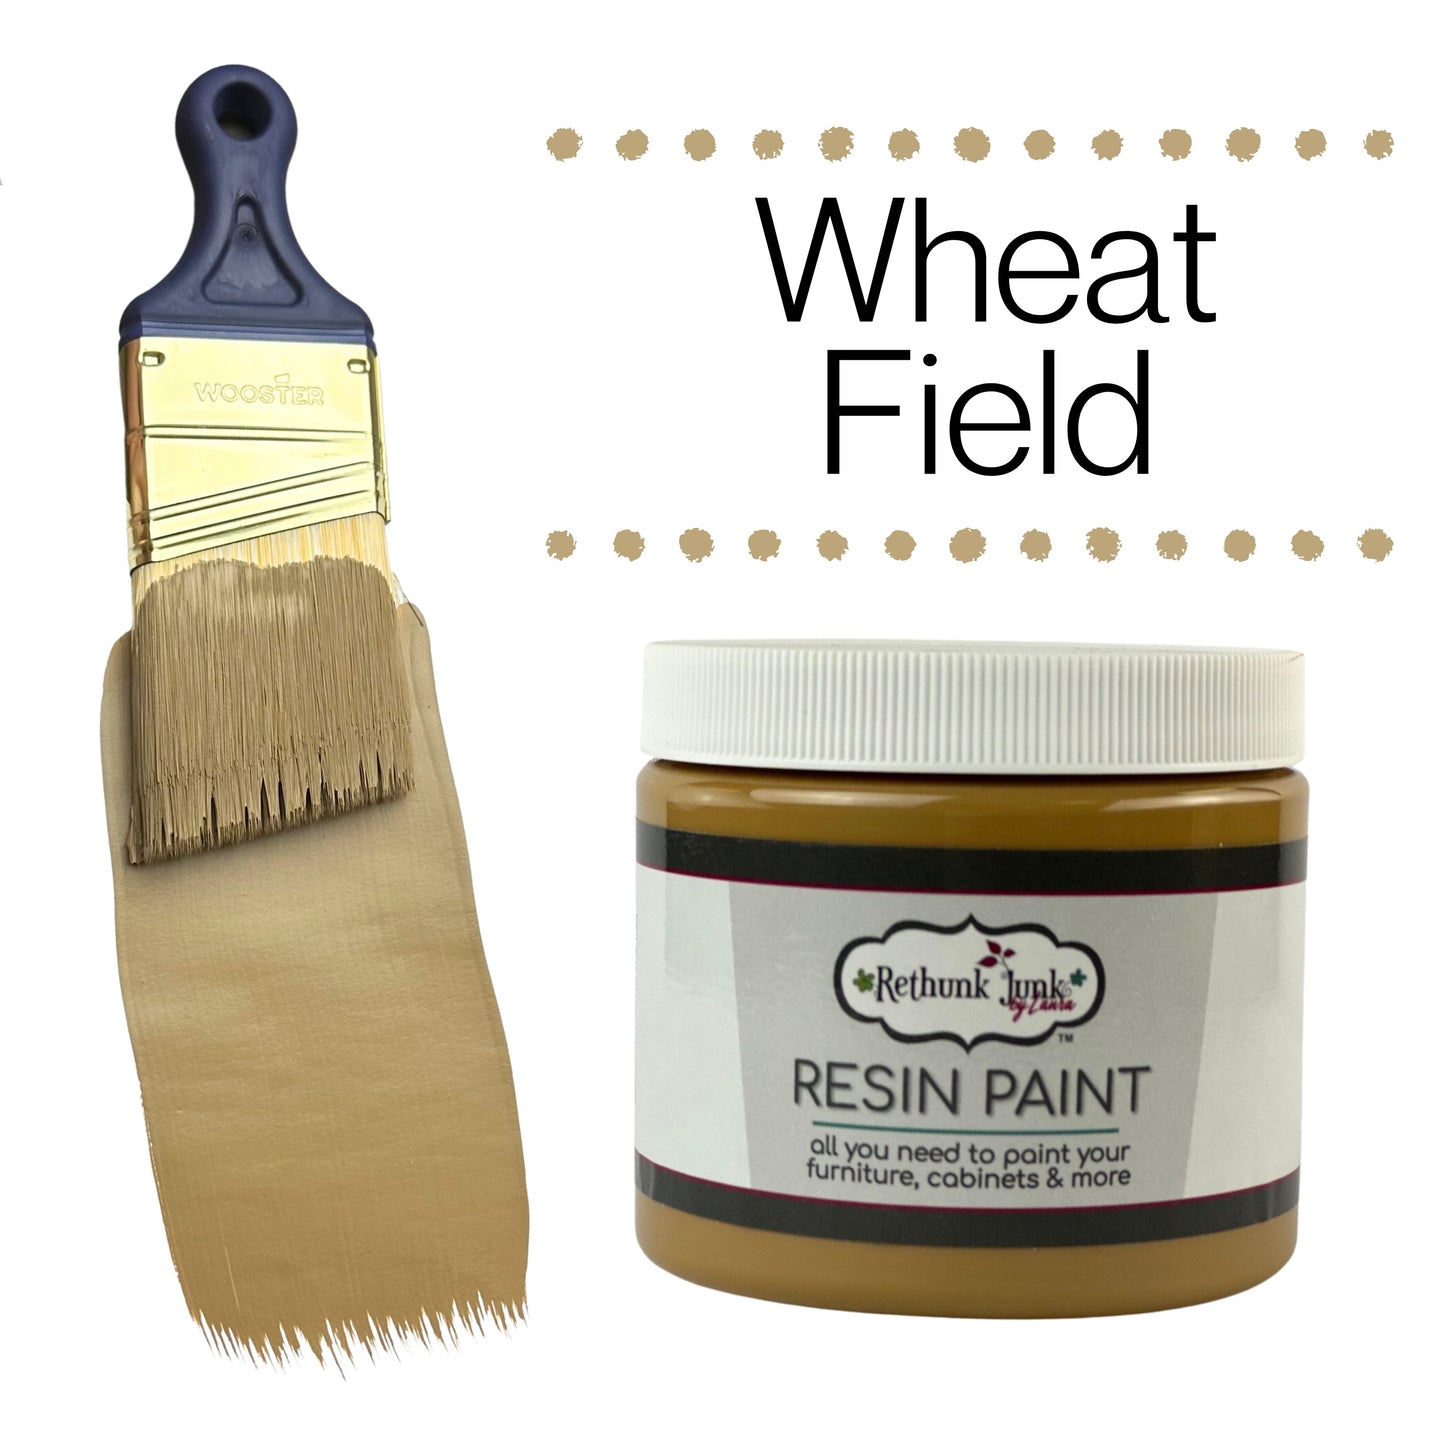 Rethunk Junk Resin Paint in Wheat Field